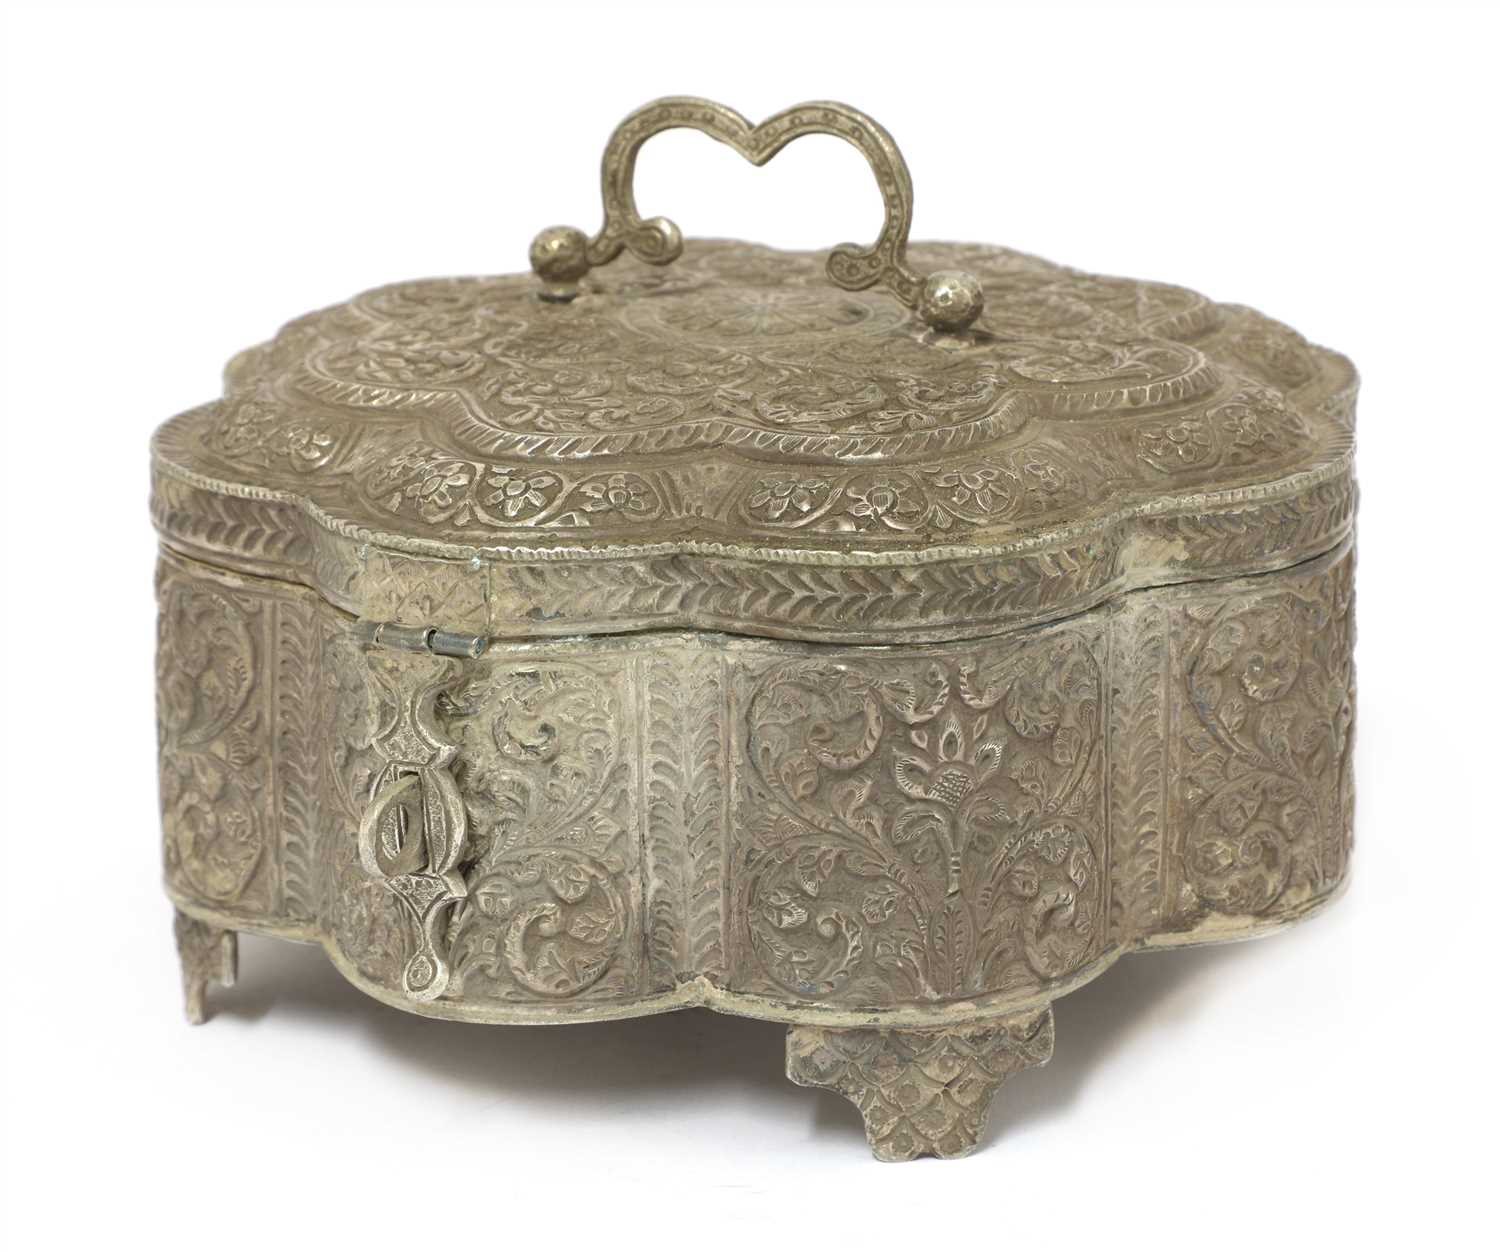 Lot 97 - An Indian white metal betel or spice box